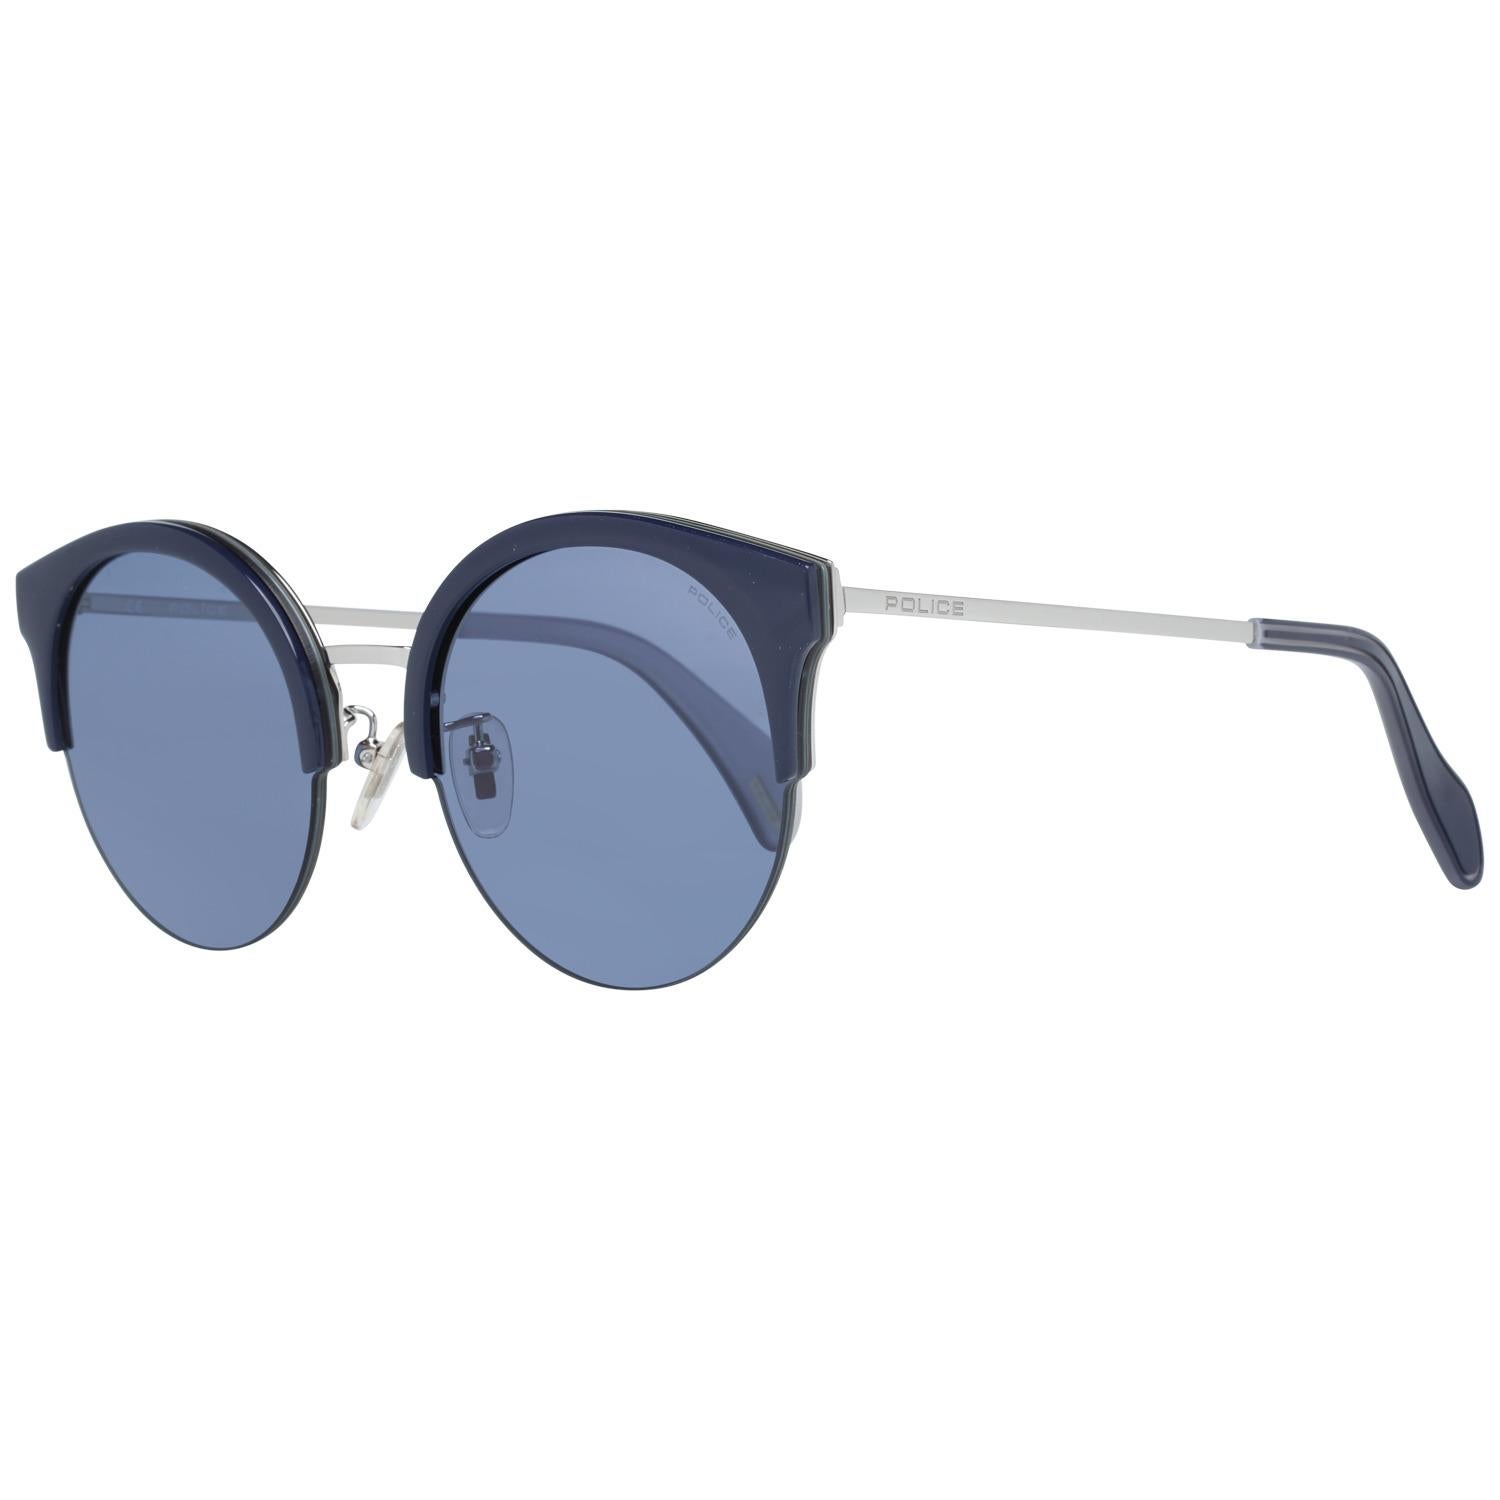 Details
MATERIAL: Metal
COLOR: Silver
MODEL: SPL615 610579
GENDER: Women
COUNTRY OF MANUFACTURE: China
TYPE: Sunglasses
ORIGINAL CASE?: Yes
STYLE: Round
OCCASION: Casual
FEATURES: Lightweight
LENS COLOR: Blue
LENS TECHNOLOGY: No Extra
YEAR